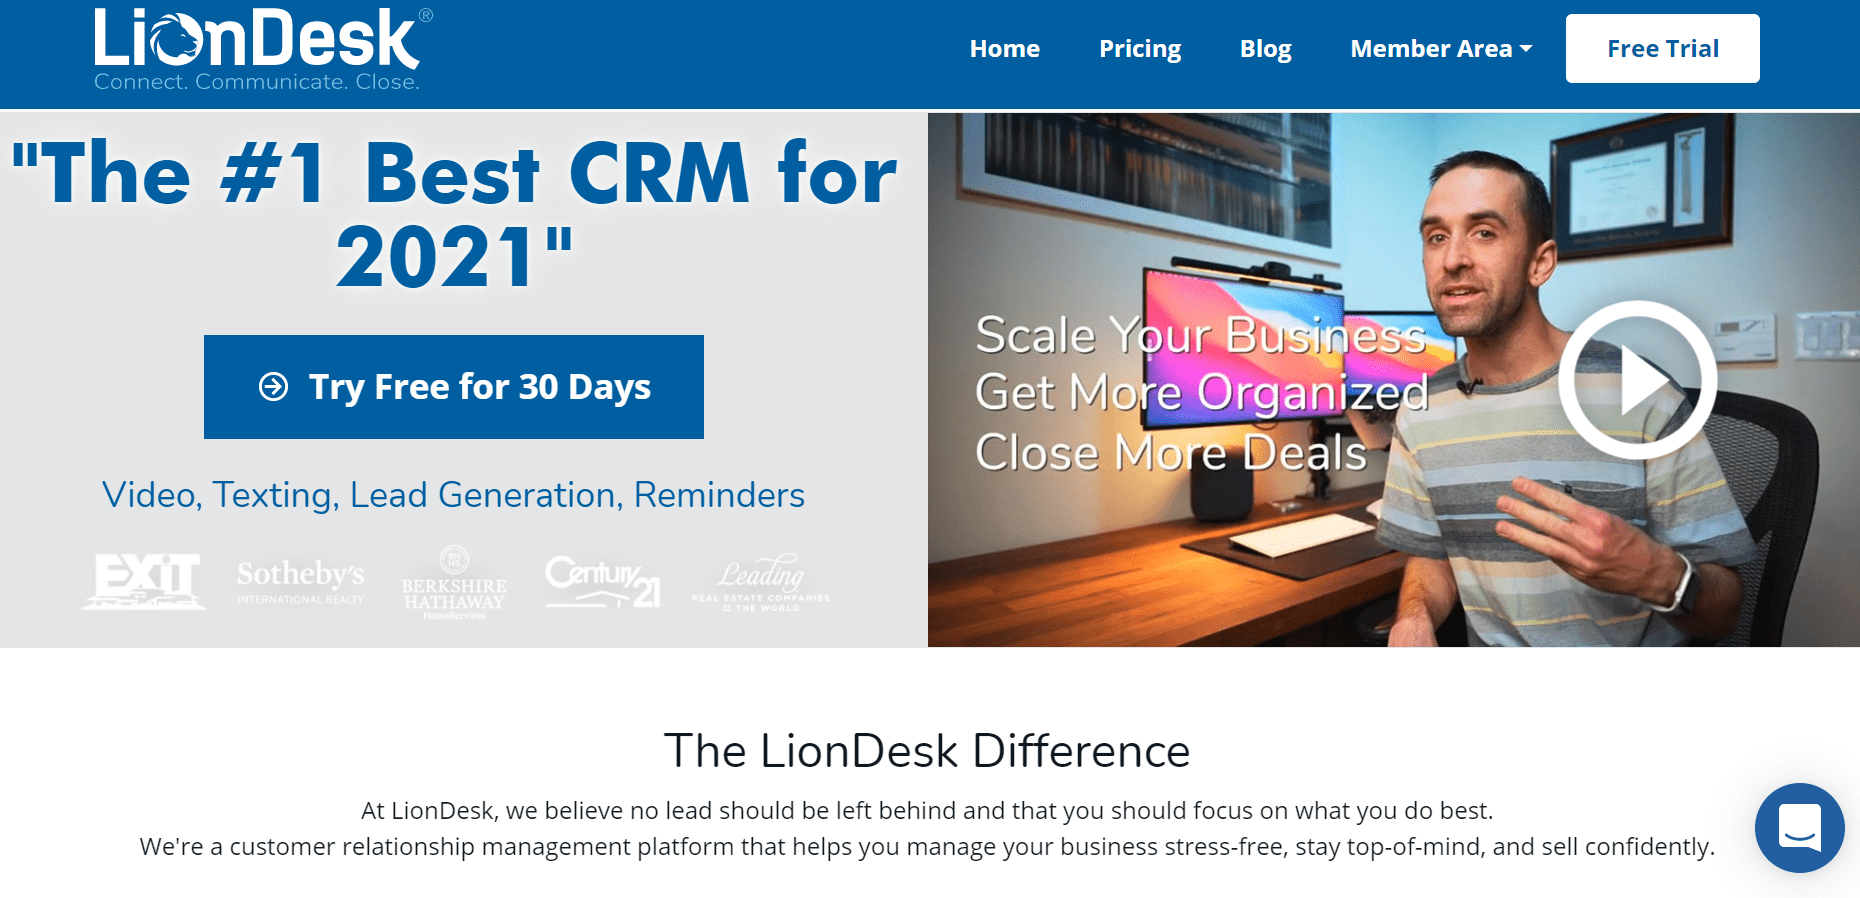 Liondesk-crm